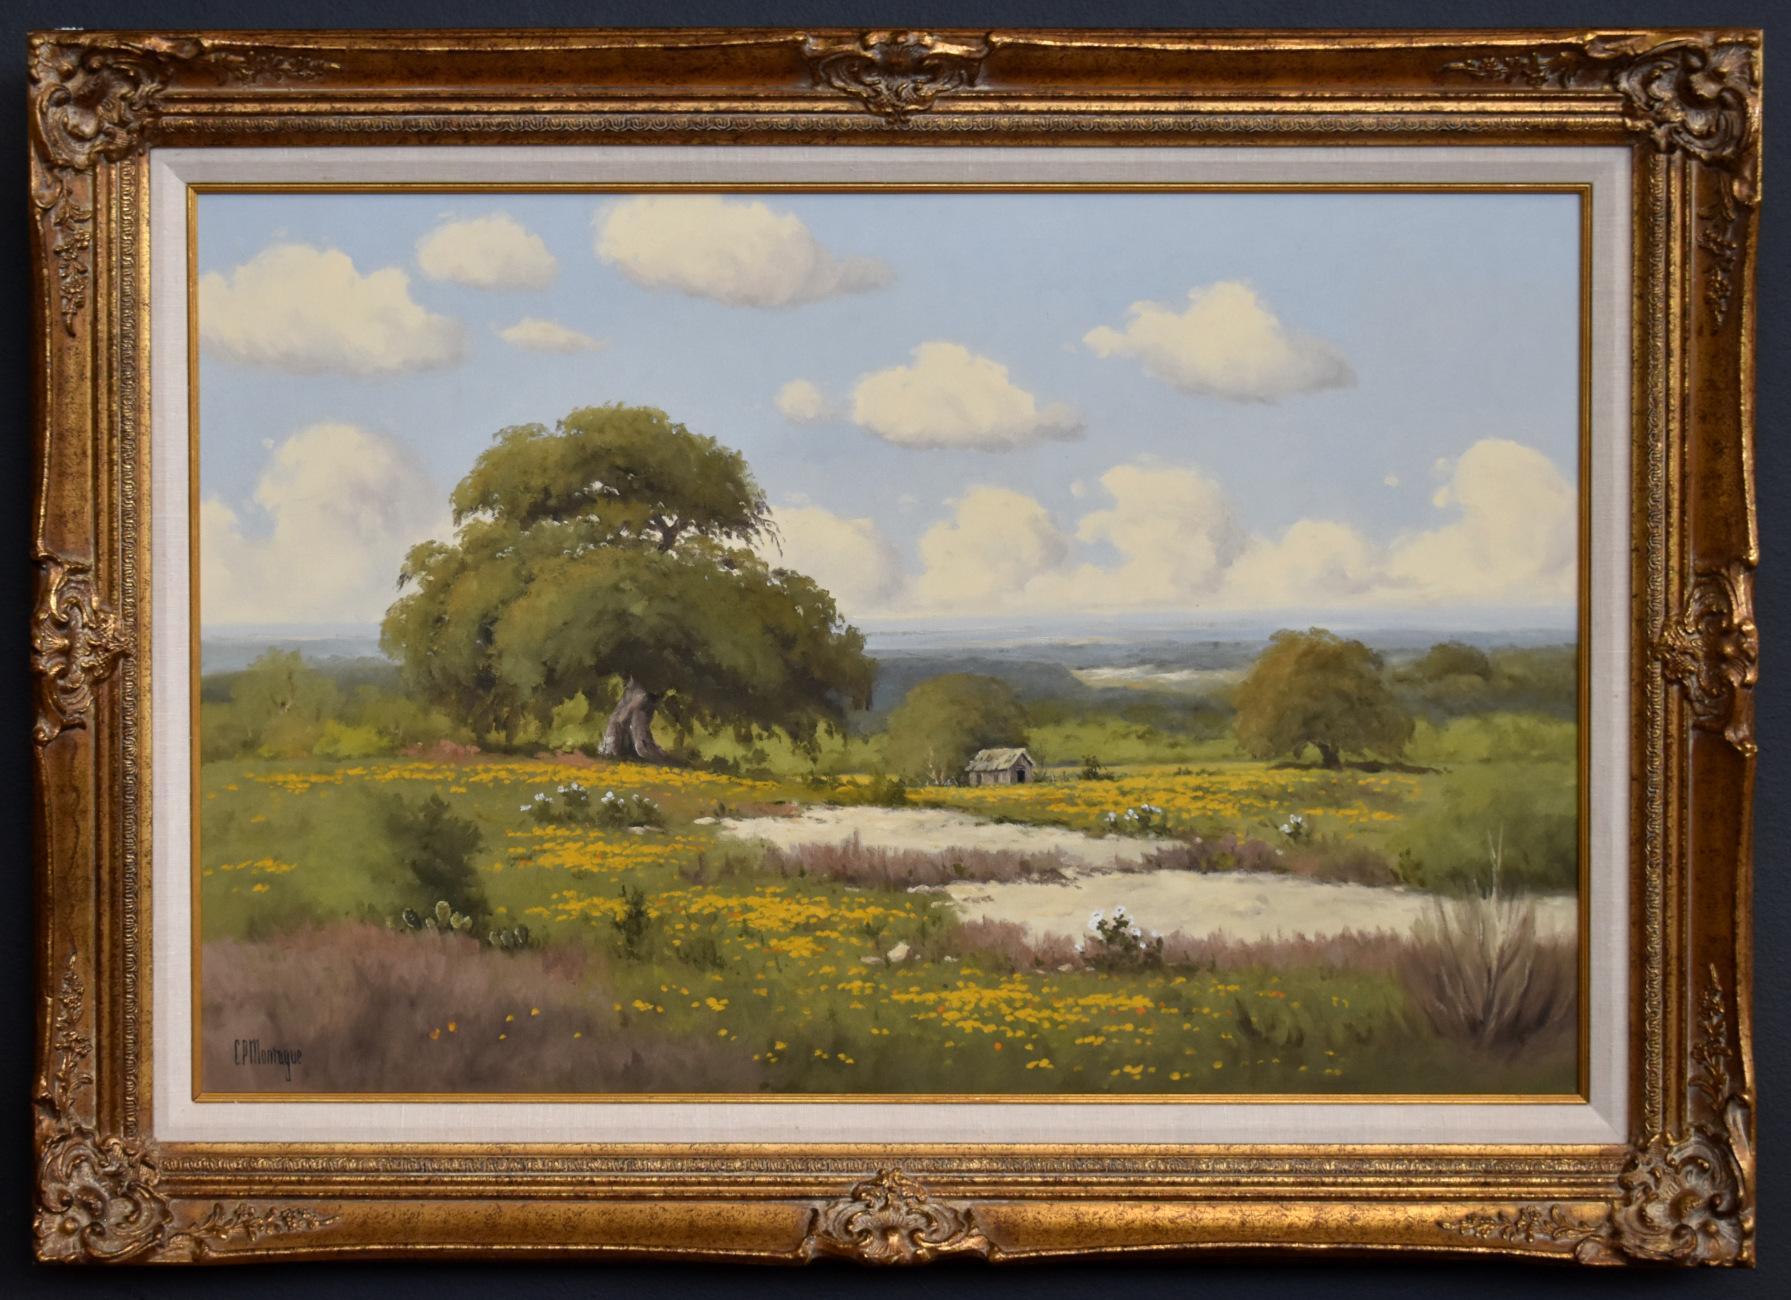 C.P. Montague Landscape Painting - "Coreopsis Meadow"  TEXAS HILL COUNTRY WILDFLOWER PAINTING